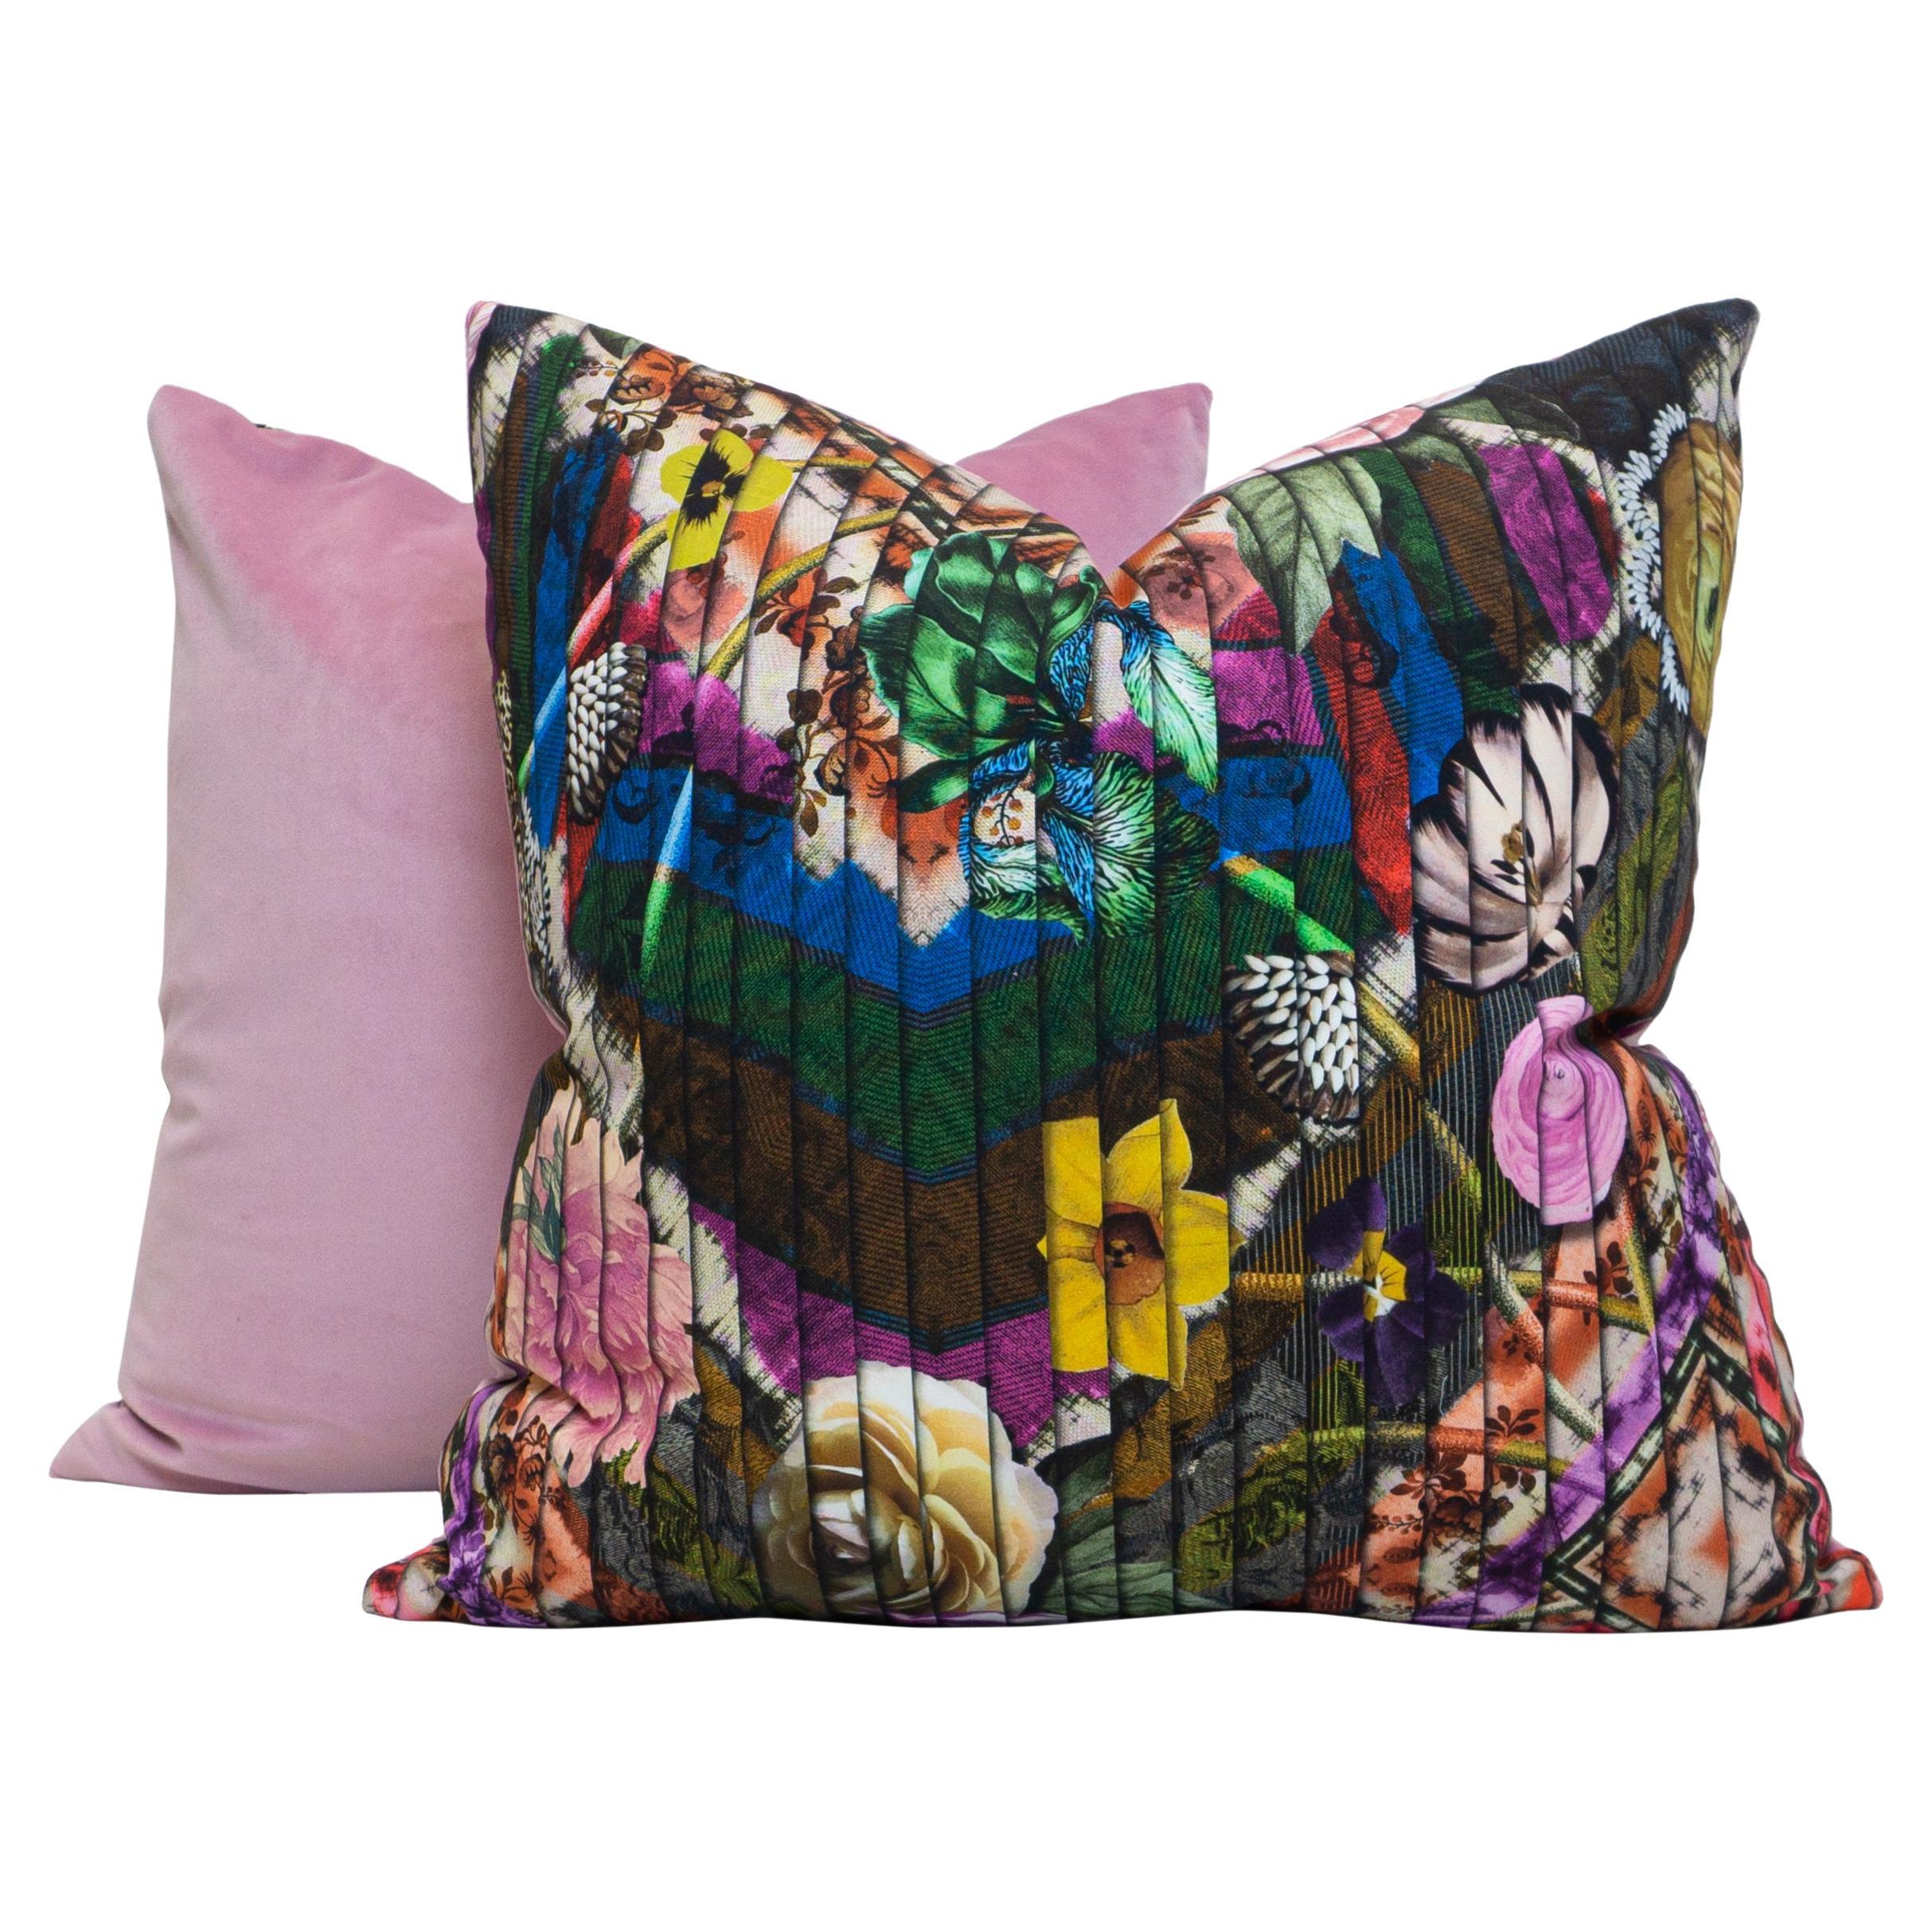 Stained Glass Floral Printed Pillows with Pink Velvet Back For Sale